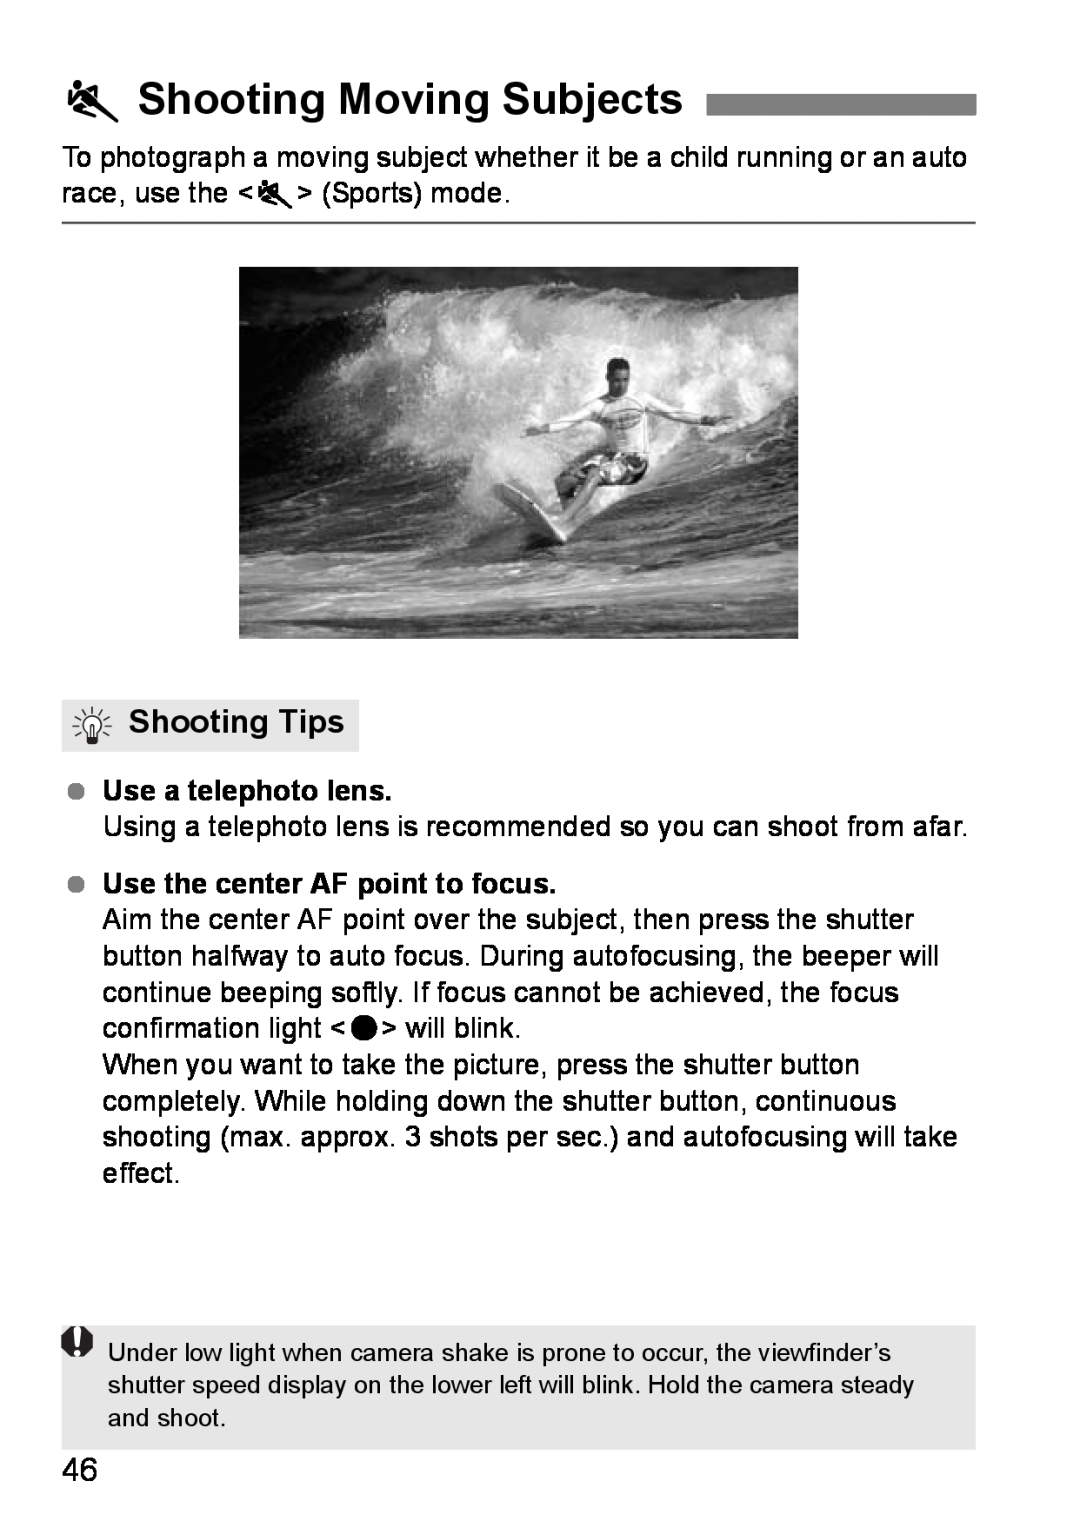 Canon EOS DIGITAL REBEL XTI instruction manual 5Shooting Moving Subjects, Shooting Tips, Use a telephoto lens 